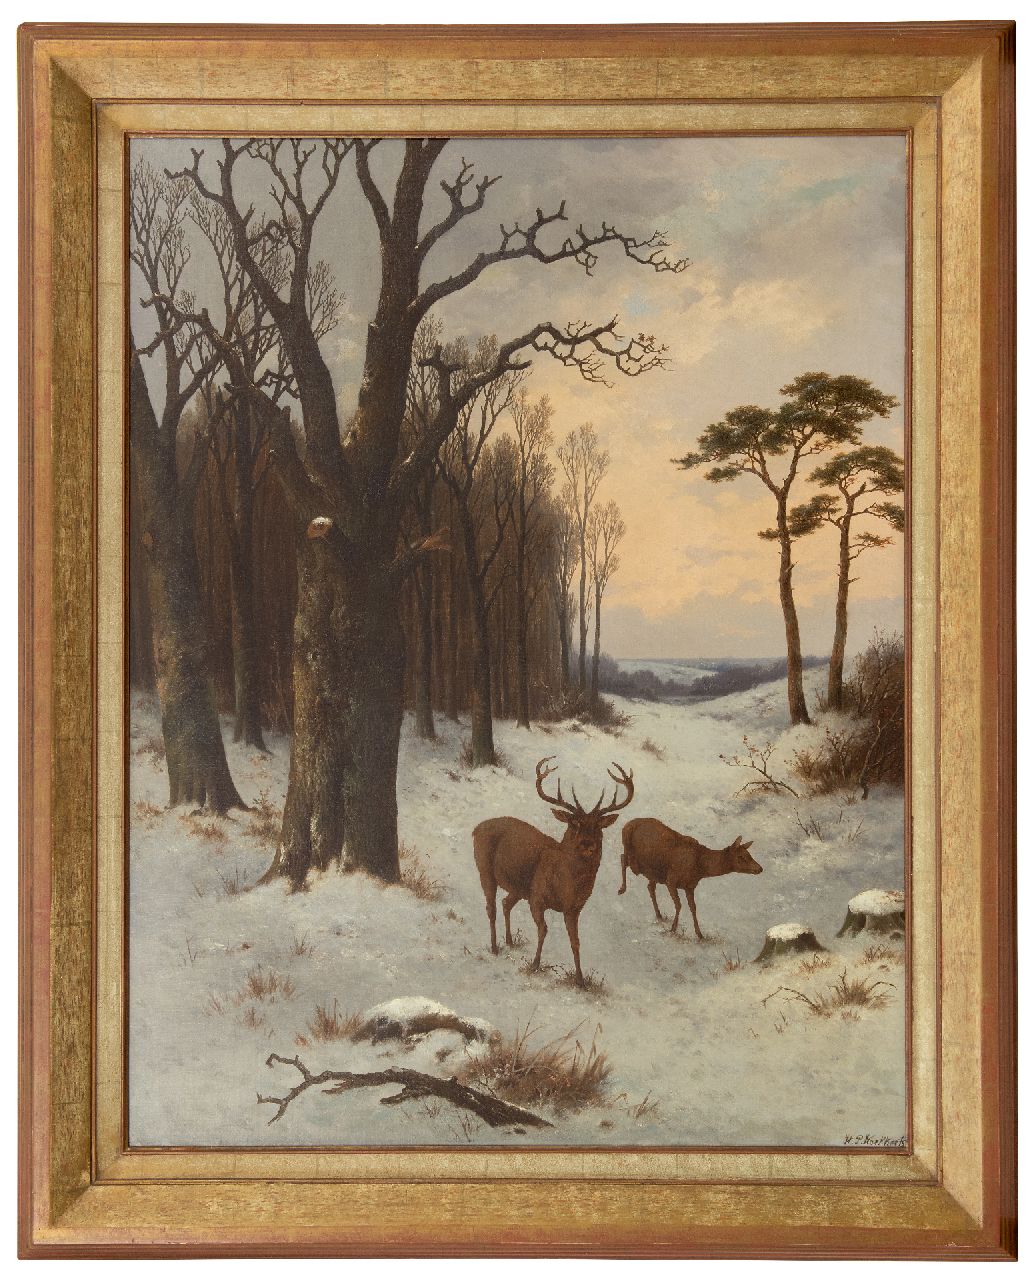 Koekkoek P.H.  | Pieter Hendrik 'H.P.' Koekkoek | Paintings offered for sale | Deers in a snowy forest, oil on canvas 91.6 x 70.8 cm, signed l.r. and painted ca. 1870